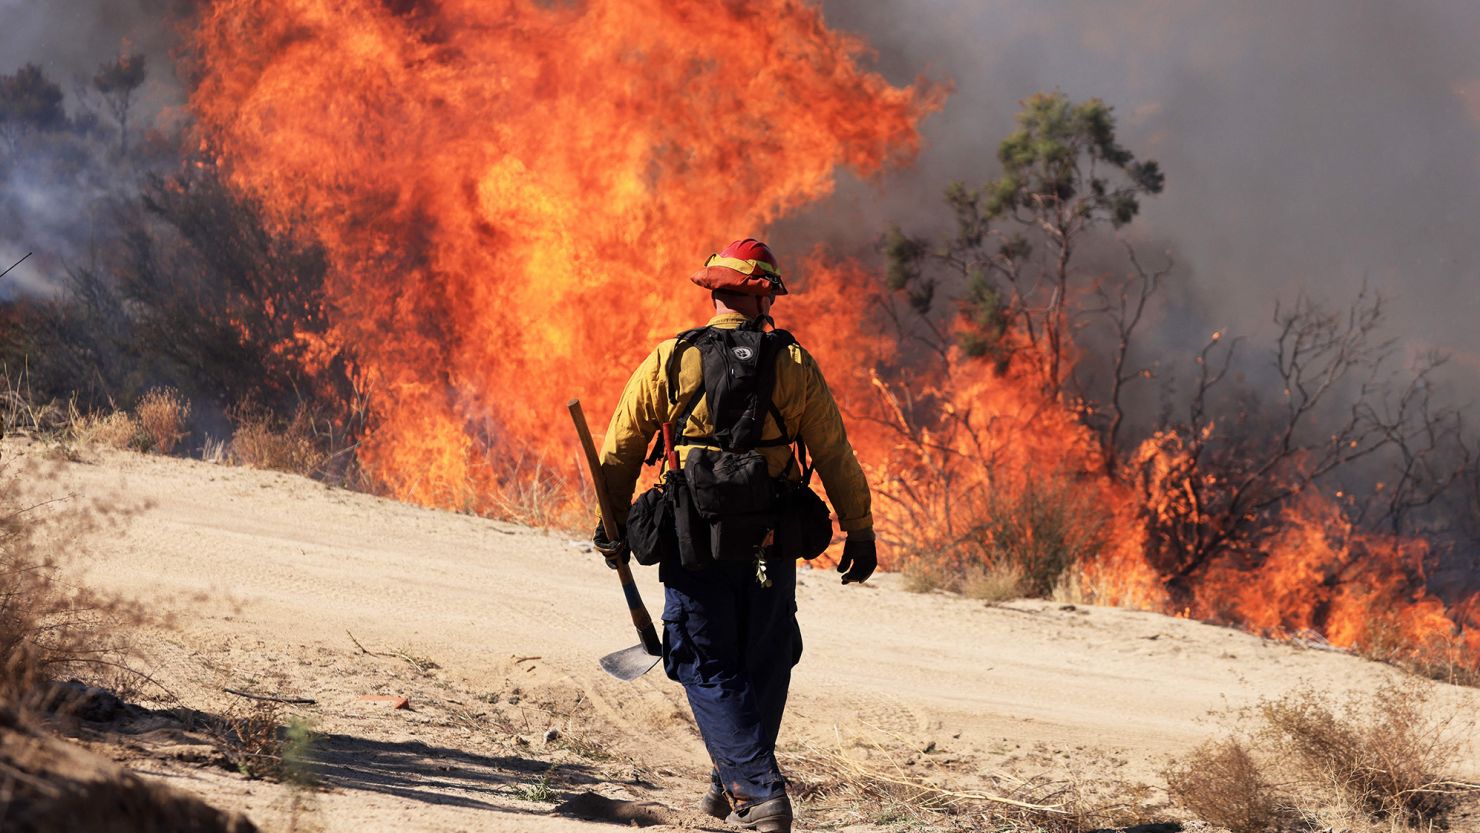 TOPSHOT - A firefighter walks toward flames as the Highland Fire burns in Aguana, California, on October 31, 2023. Thousands of people were being told to flee a wildfire spreading in southern California on October 31, as strong winds fanned the flames.
Around 5,700 people were urged to leave areas threatened by the blaze, which erupted on October 30 around lunchtime and had engulfed 2,200 acres (900 hectares) by the following morning. (Photo by DAVID SWANSON / AFP) (Photo by DAVID SWANSON/AFP via Getty Images)